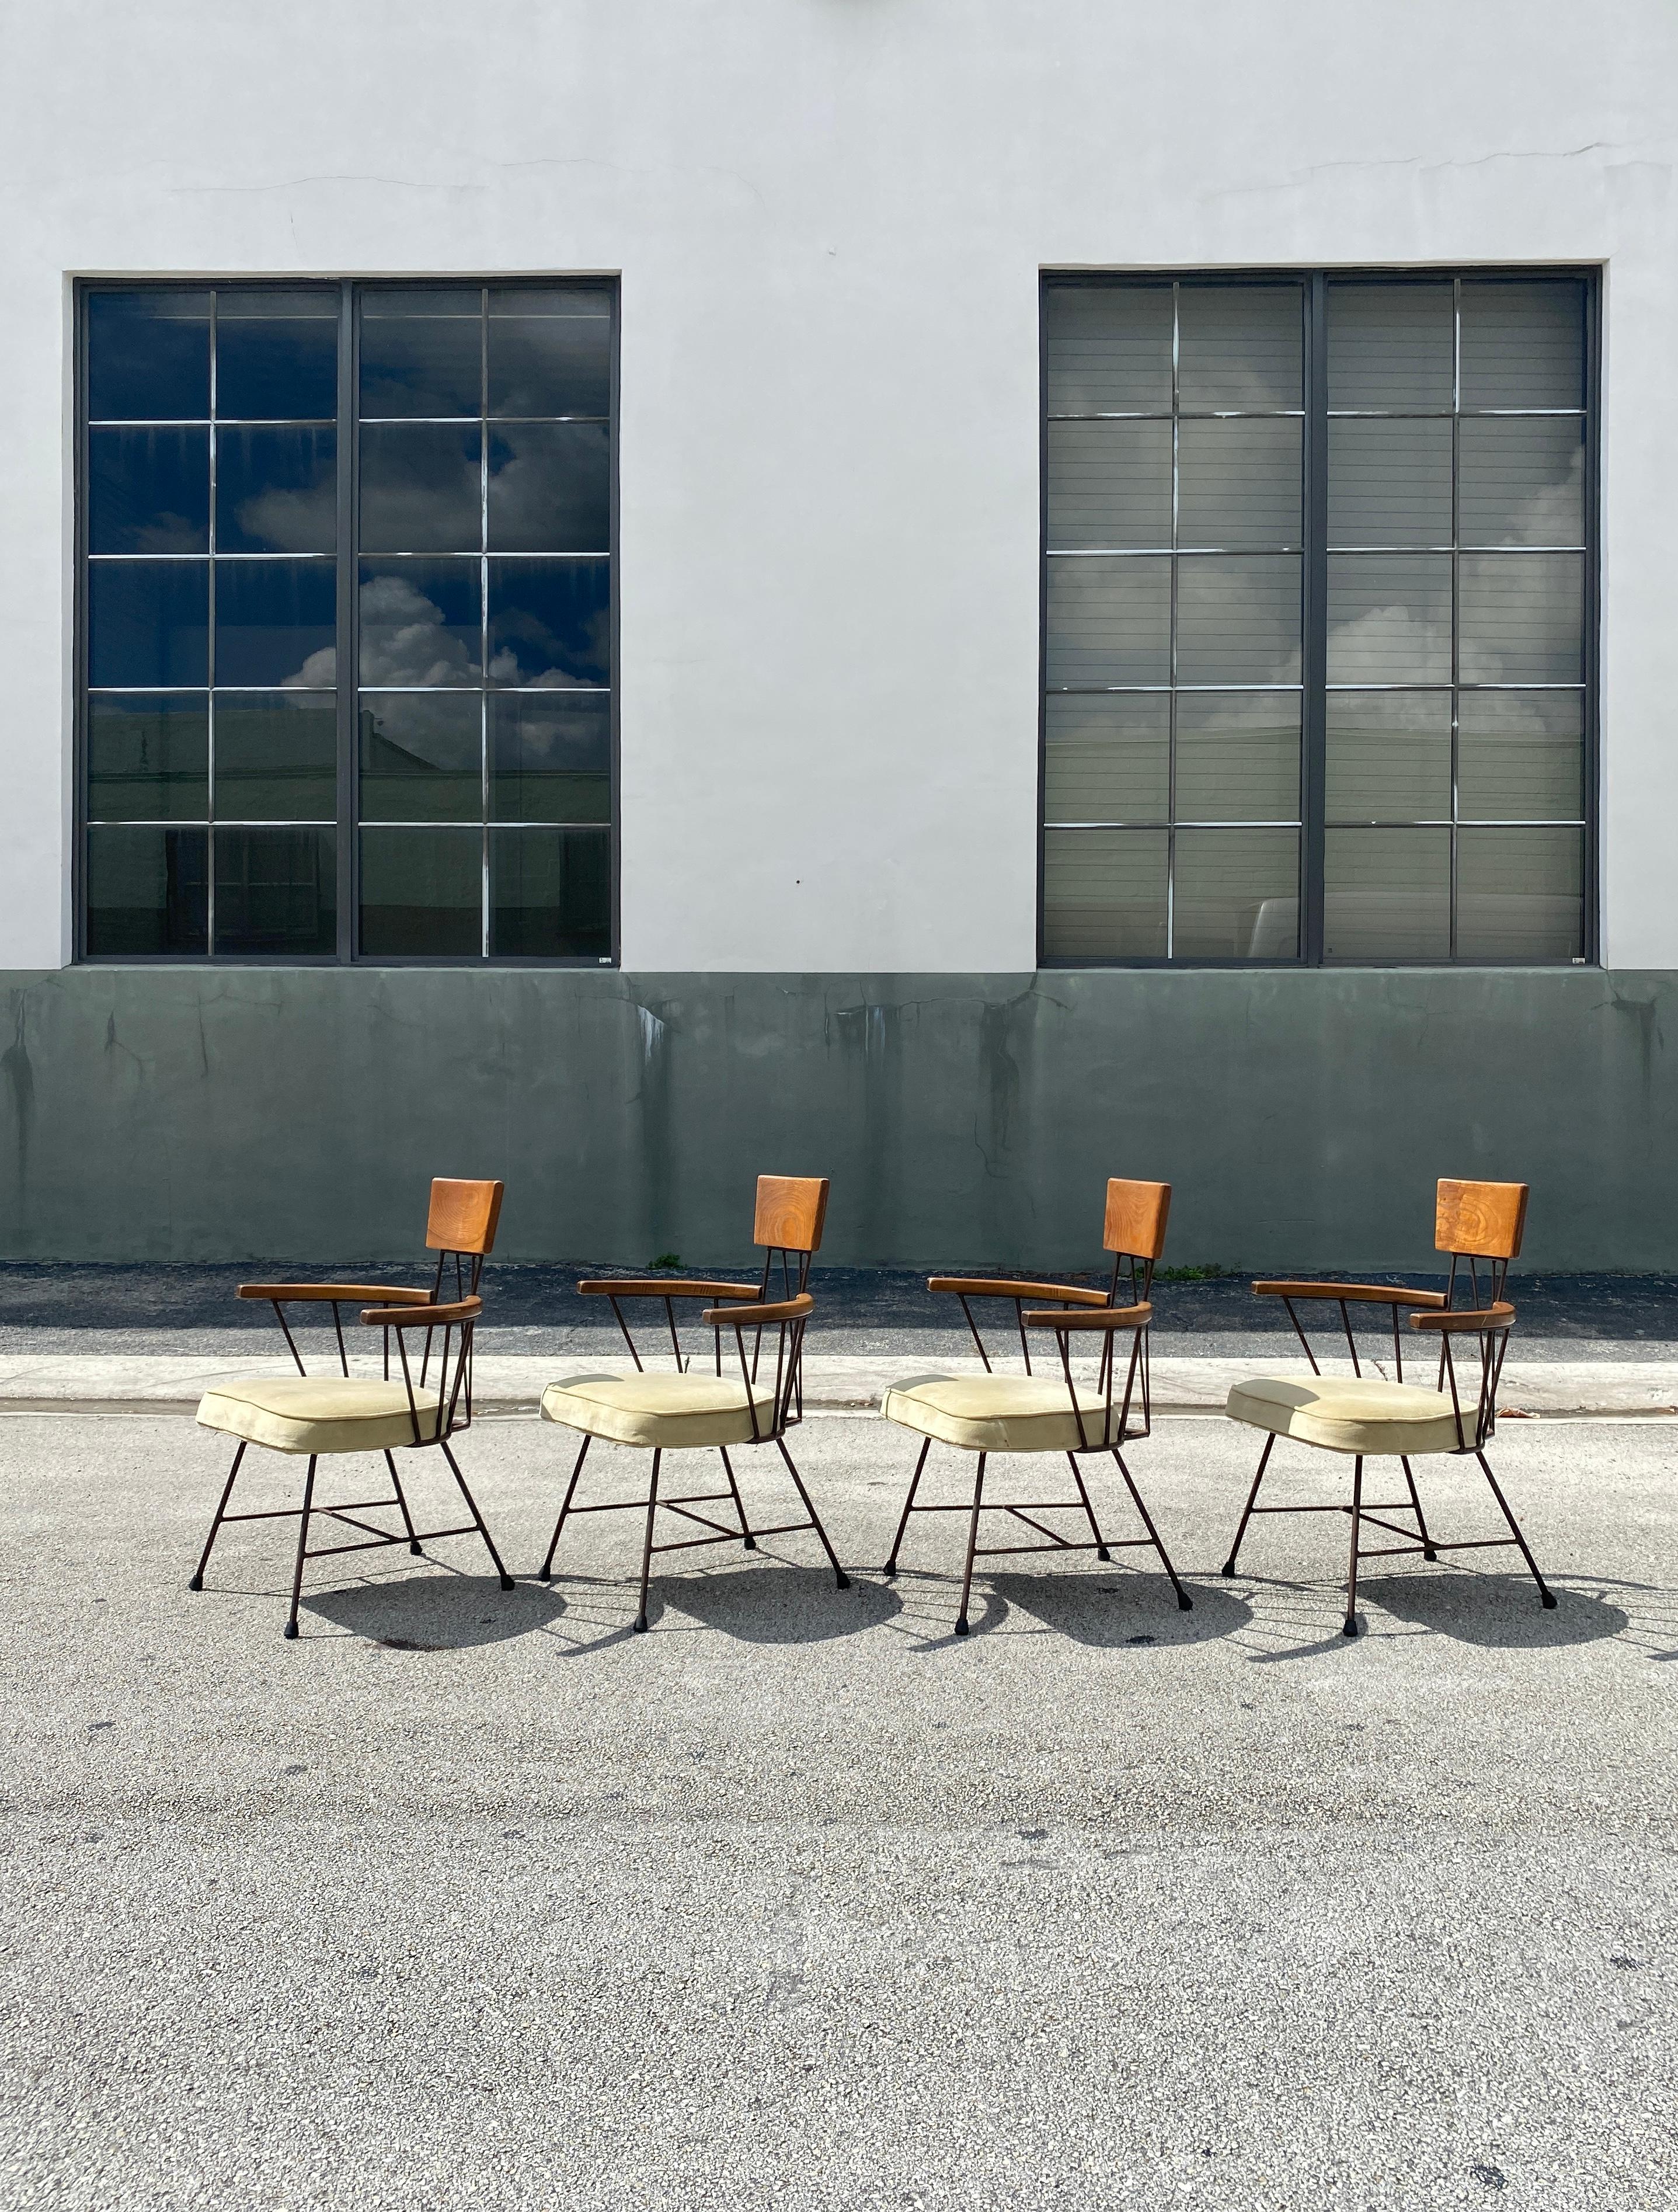 Unique vintage set of four dining chairs designed by Richard McCarthy manufactured by Selrite made of black painted iron against smooth wood featuring an industrial feel of the era. The armchairs feature curved wood arms and back headrest and